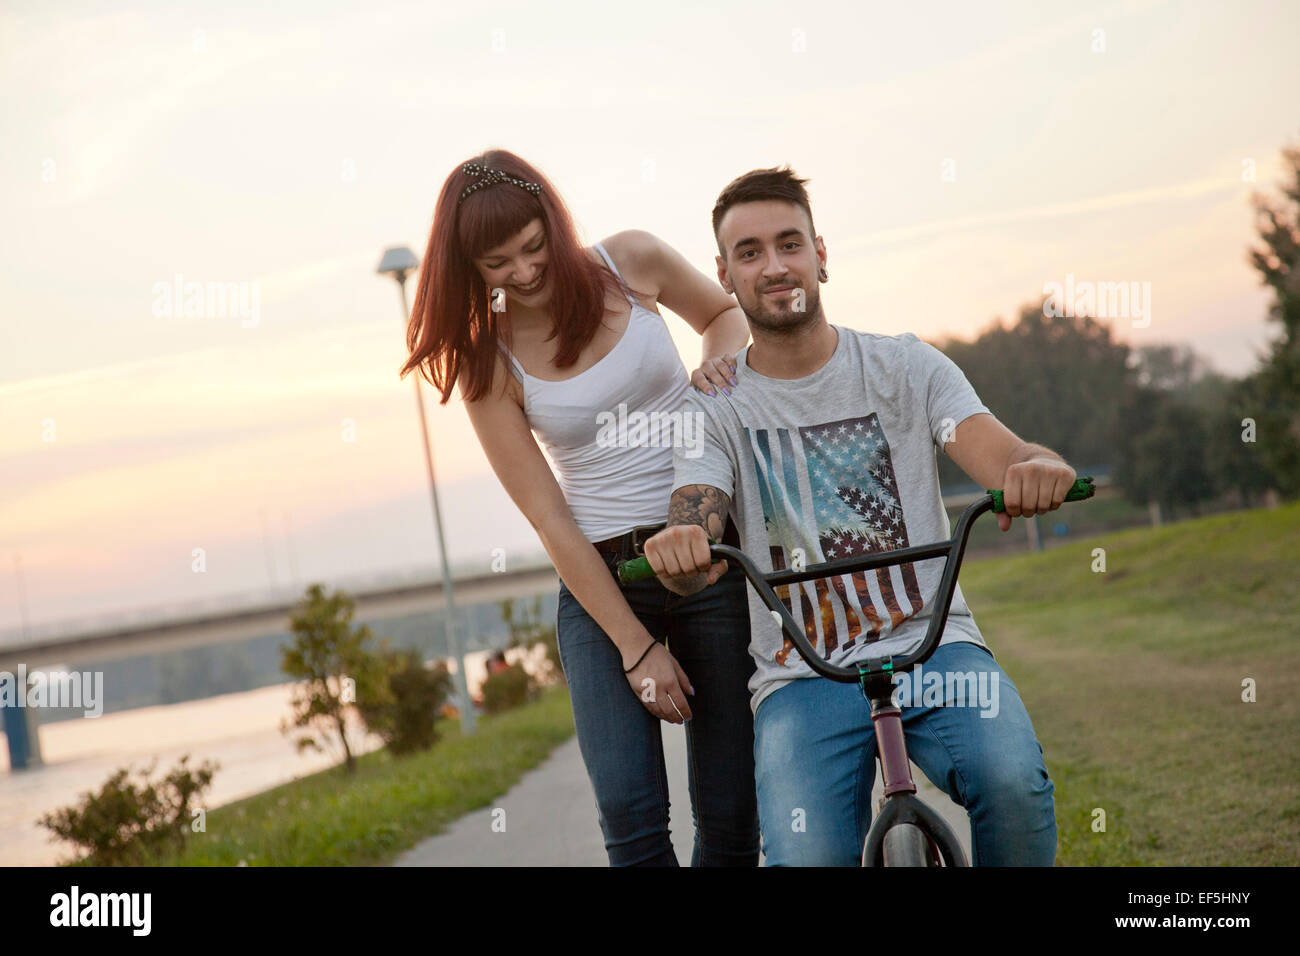 Young couple with BMX bicycle outdoors Stock Photo